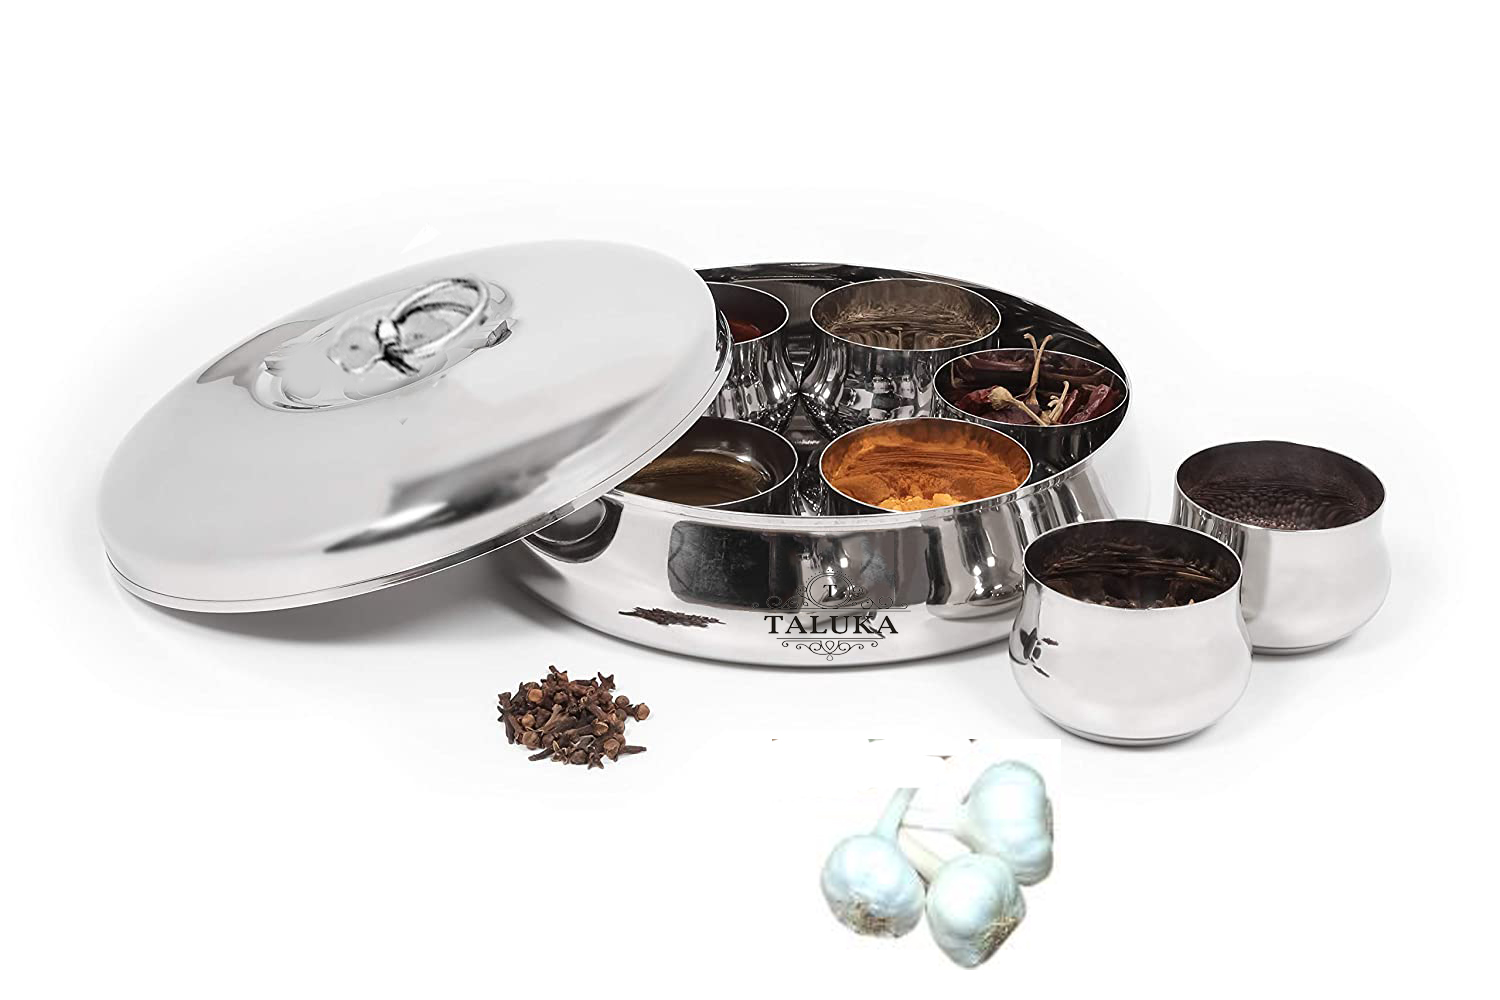 Taluka Stainless Steel Smart Kitchen Masala Box / Spice-box/masala-dani with 7 Containers and Spoon, Lid with Handle